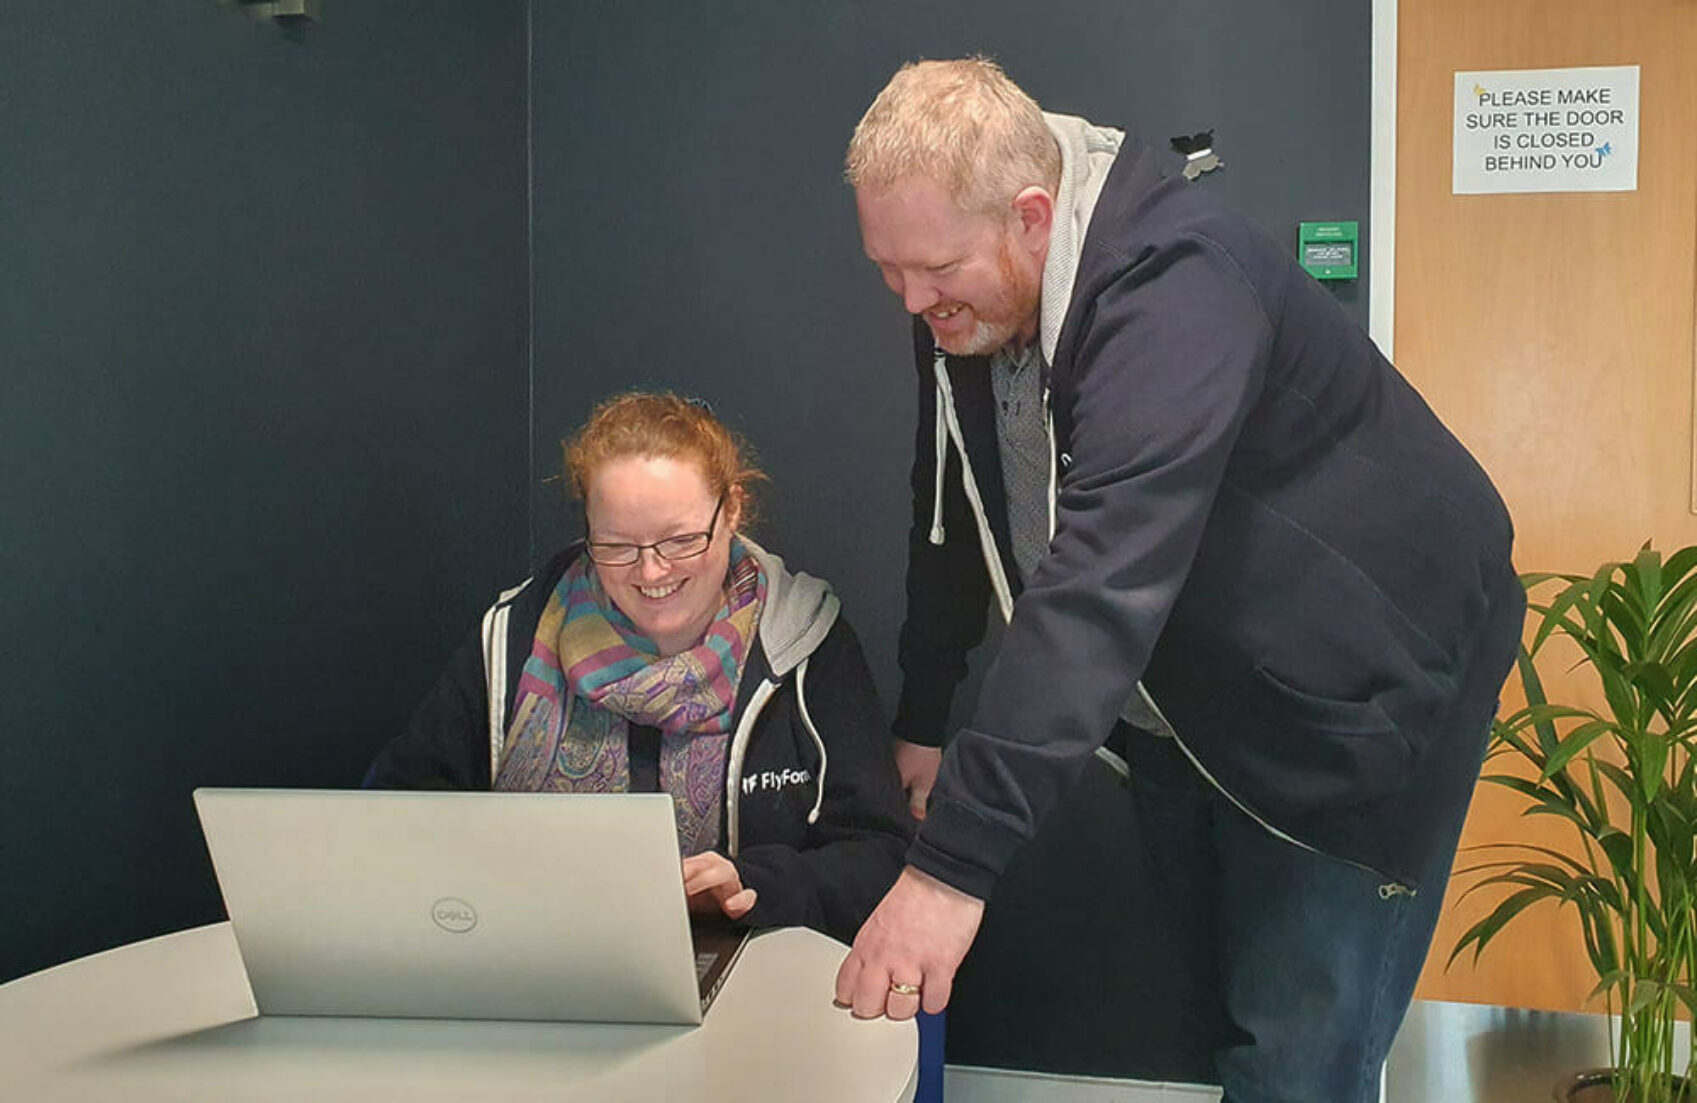 Tom Collis assists Senior PMO Analyst, Becca Callan, with an issue on her laptop in the office.